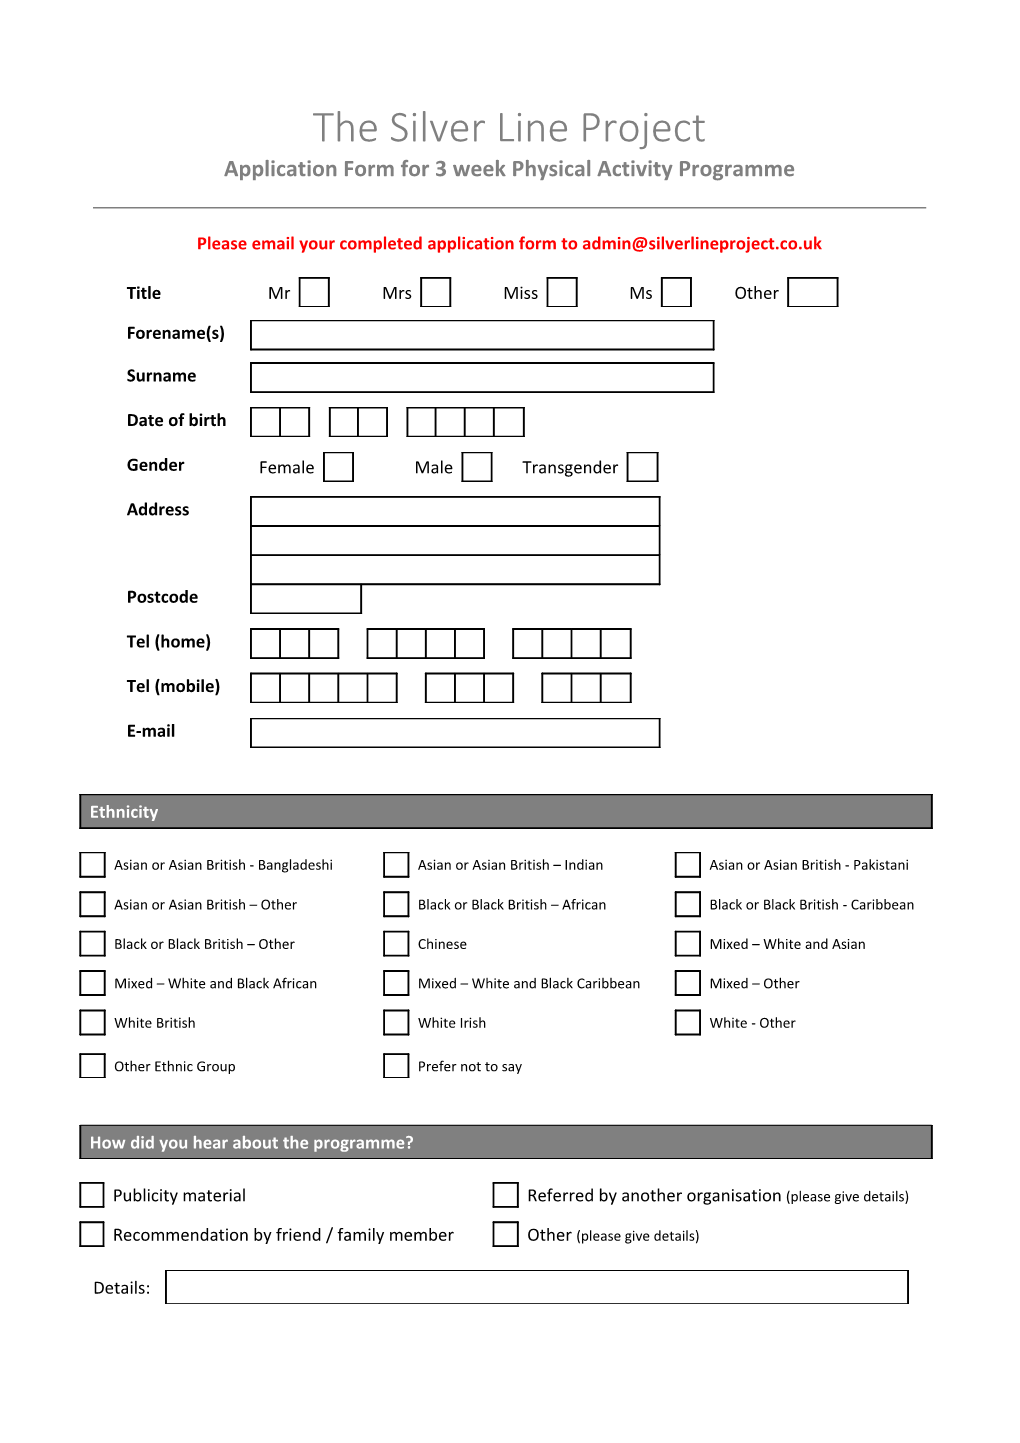 Application Form for 3 Week Physical Activity Programme